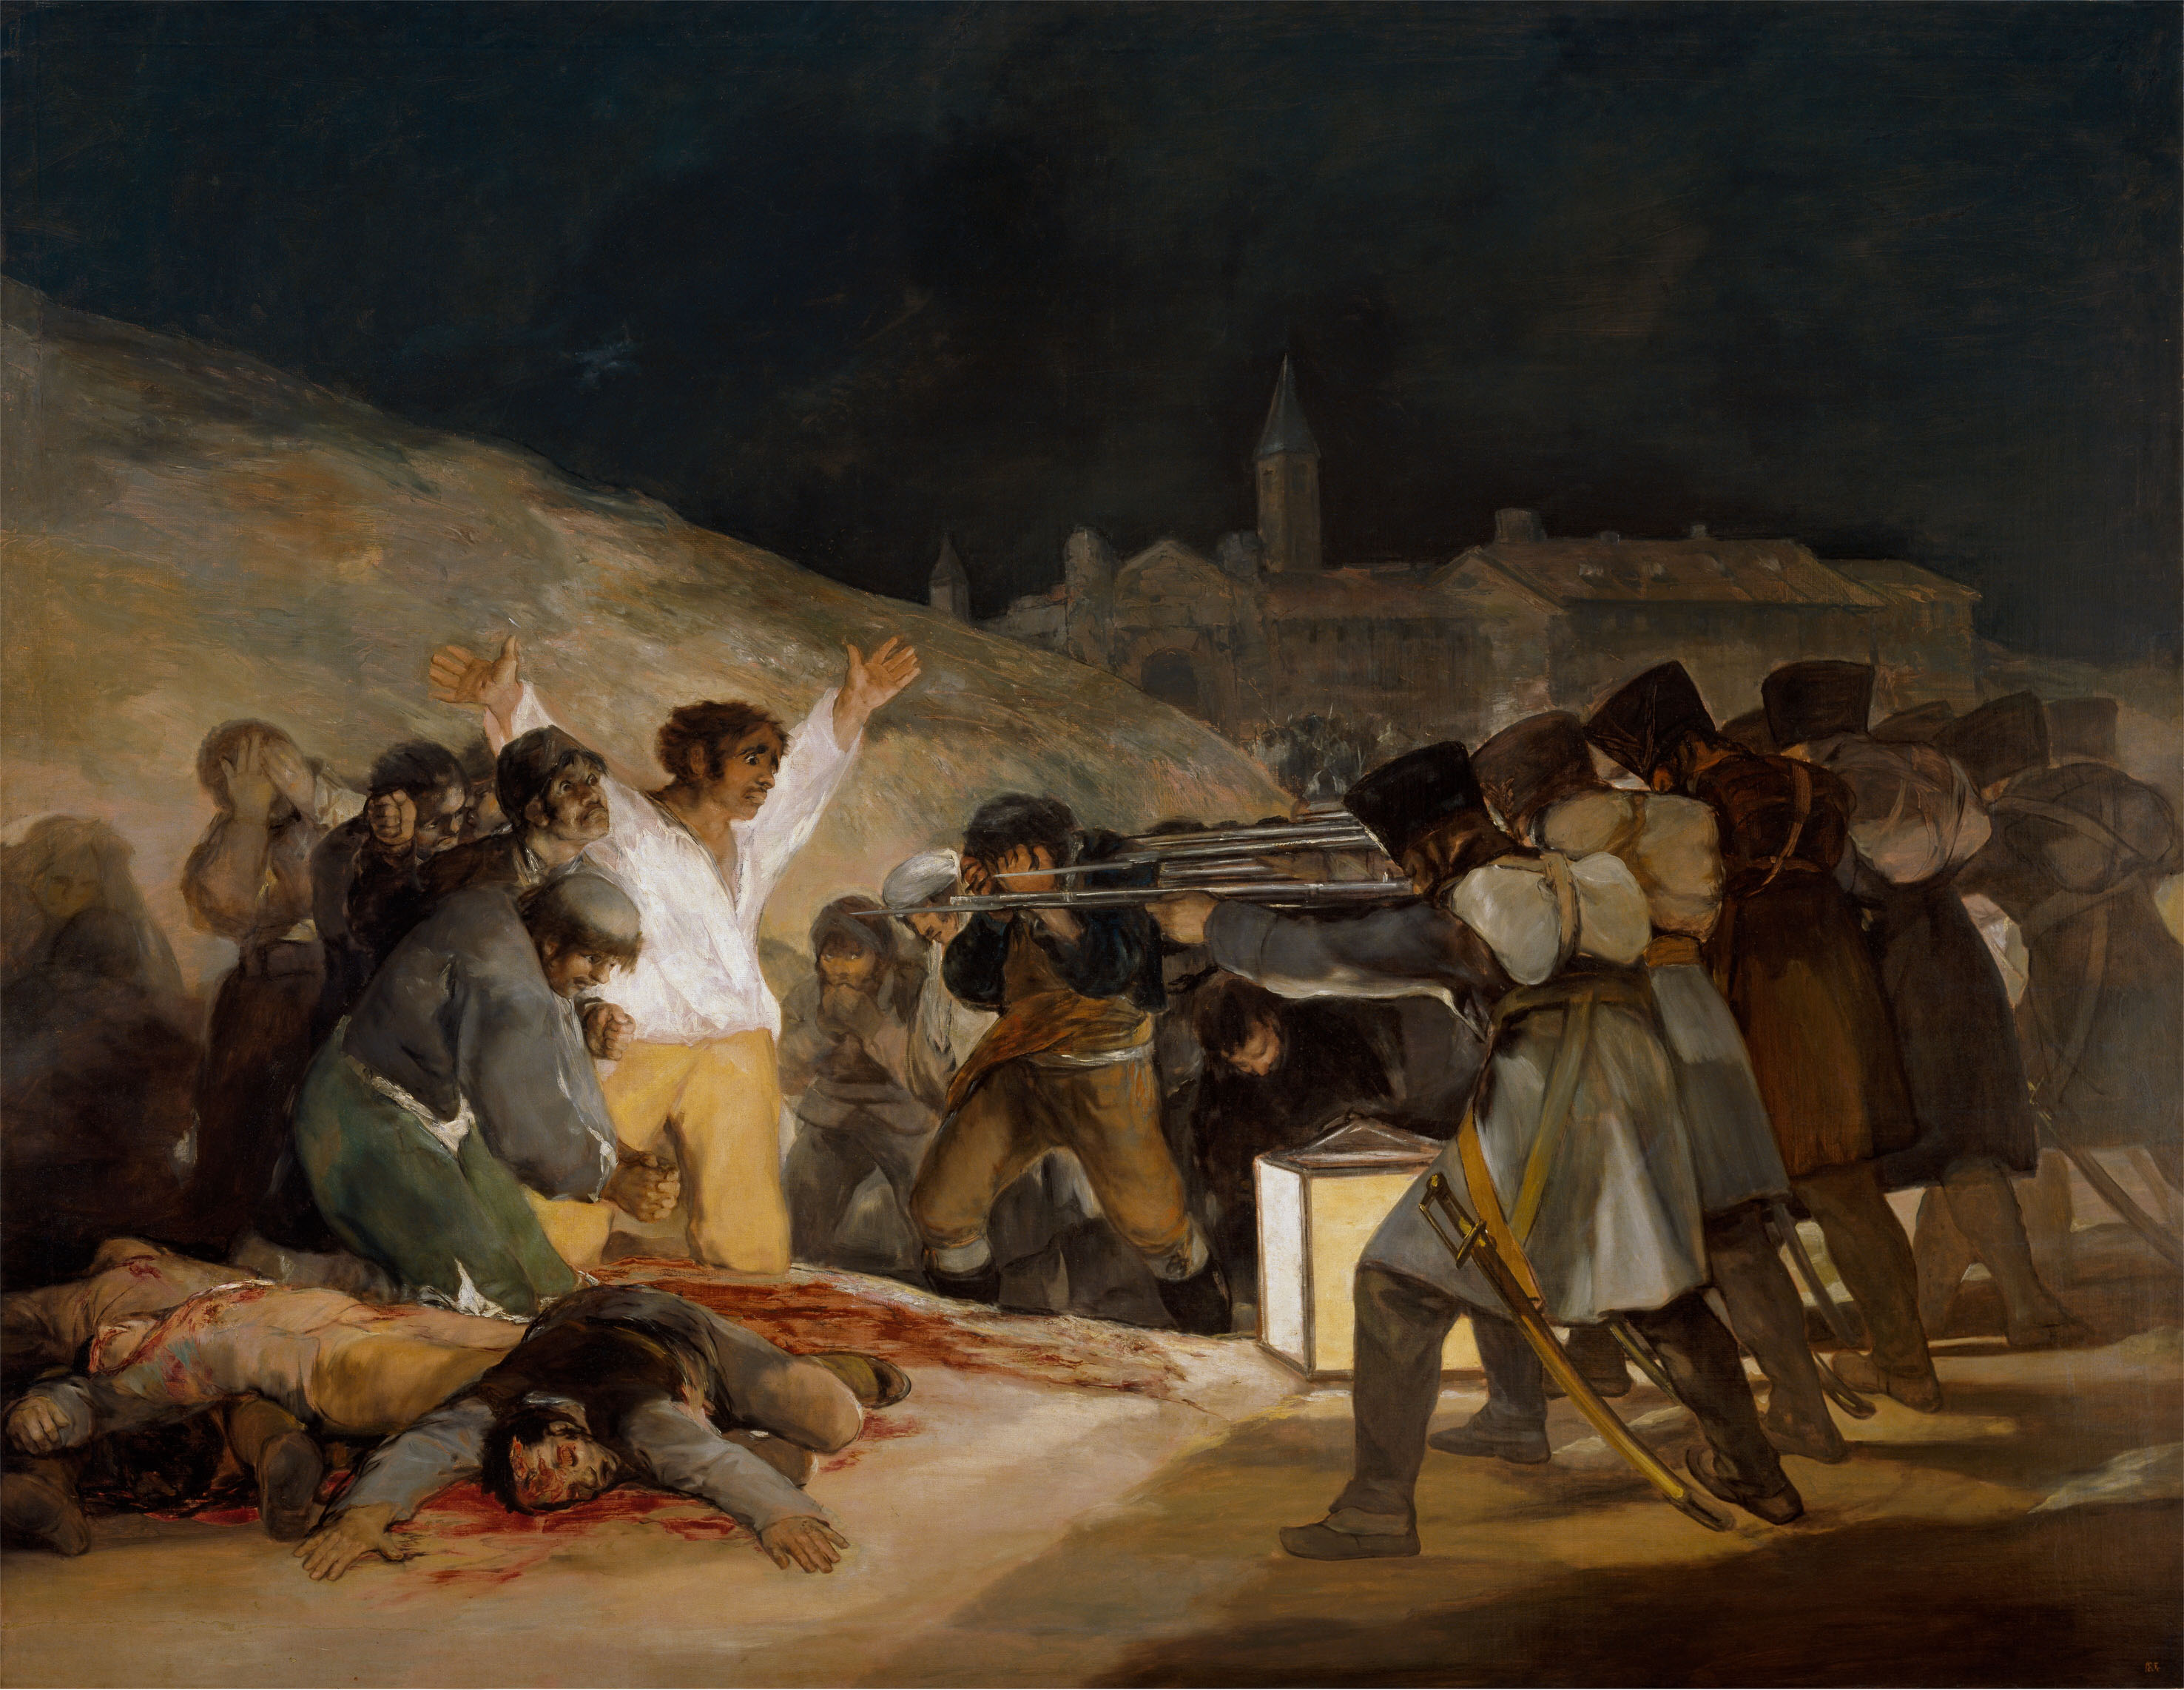 The 3rd of May 1808 in Madrid or “The exectutions”, Goya